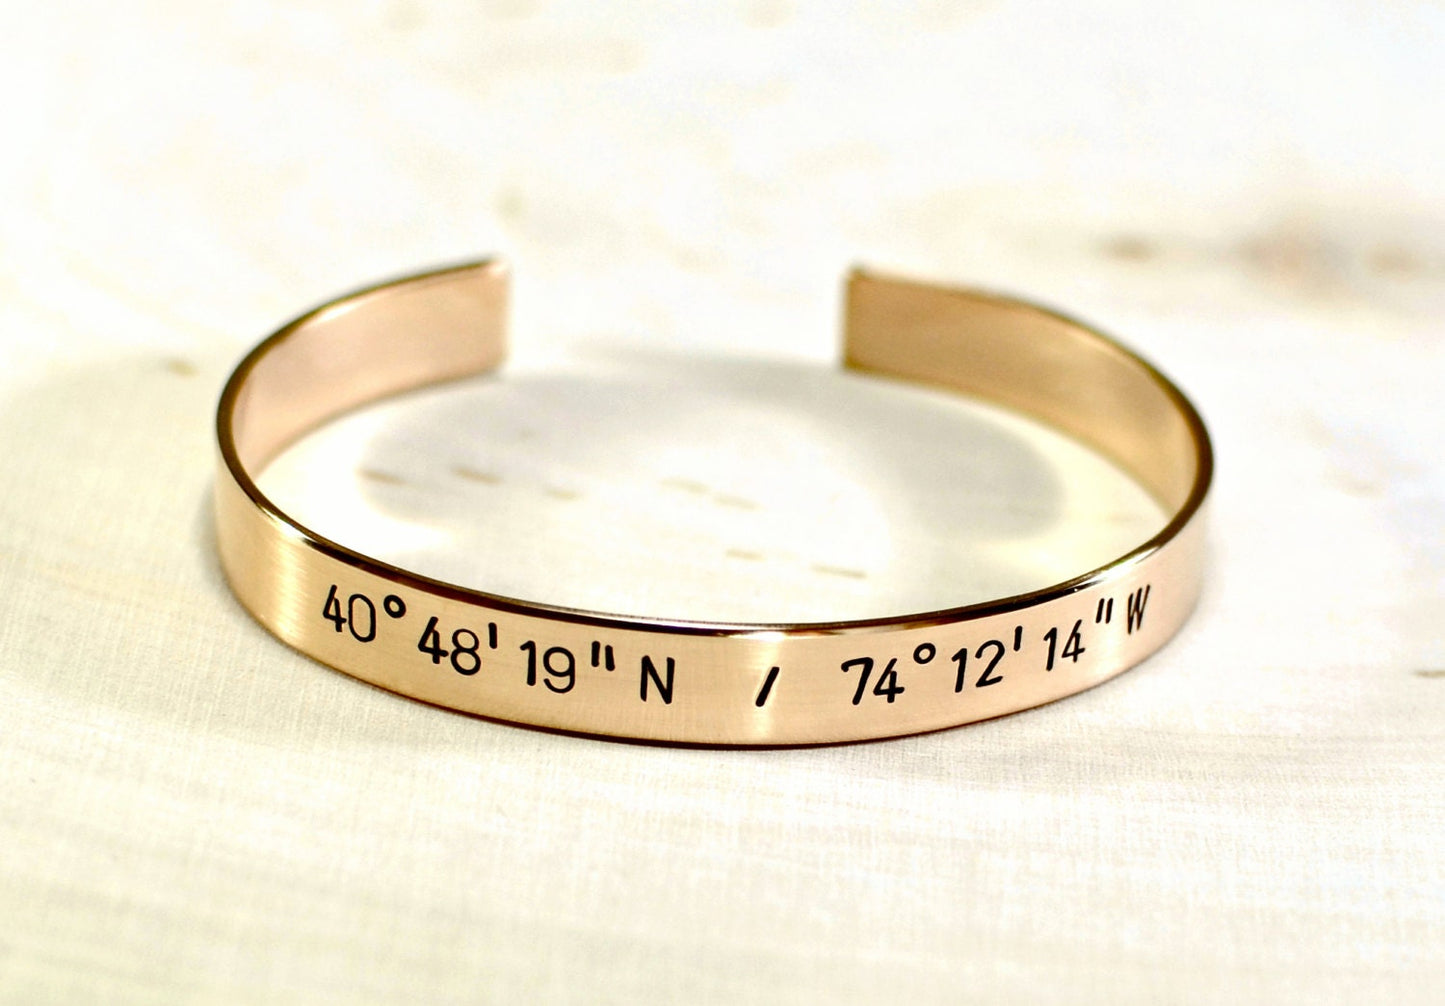 Bronze cuff bracelet personalized for graduation birthdays  8th anniversary and 19th anniversary gifts